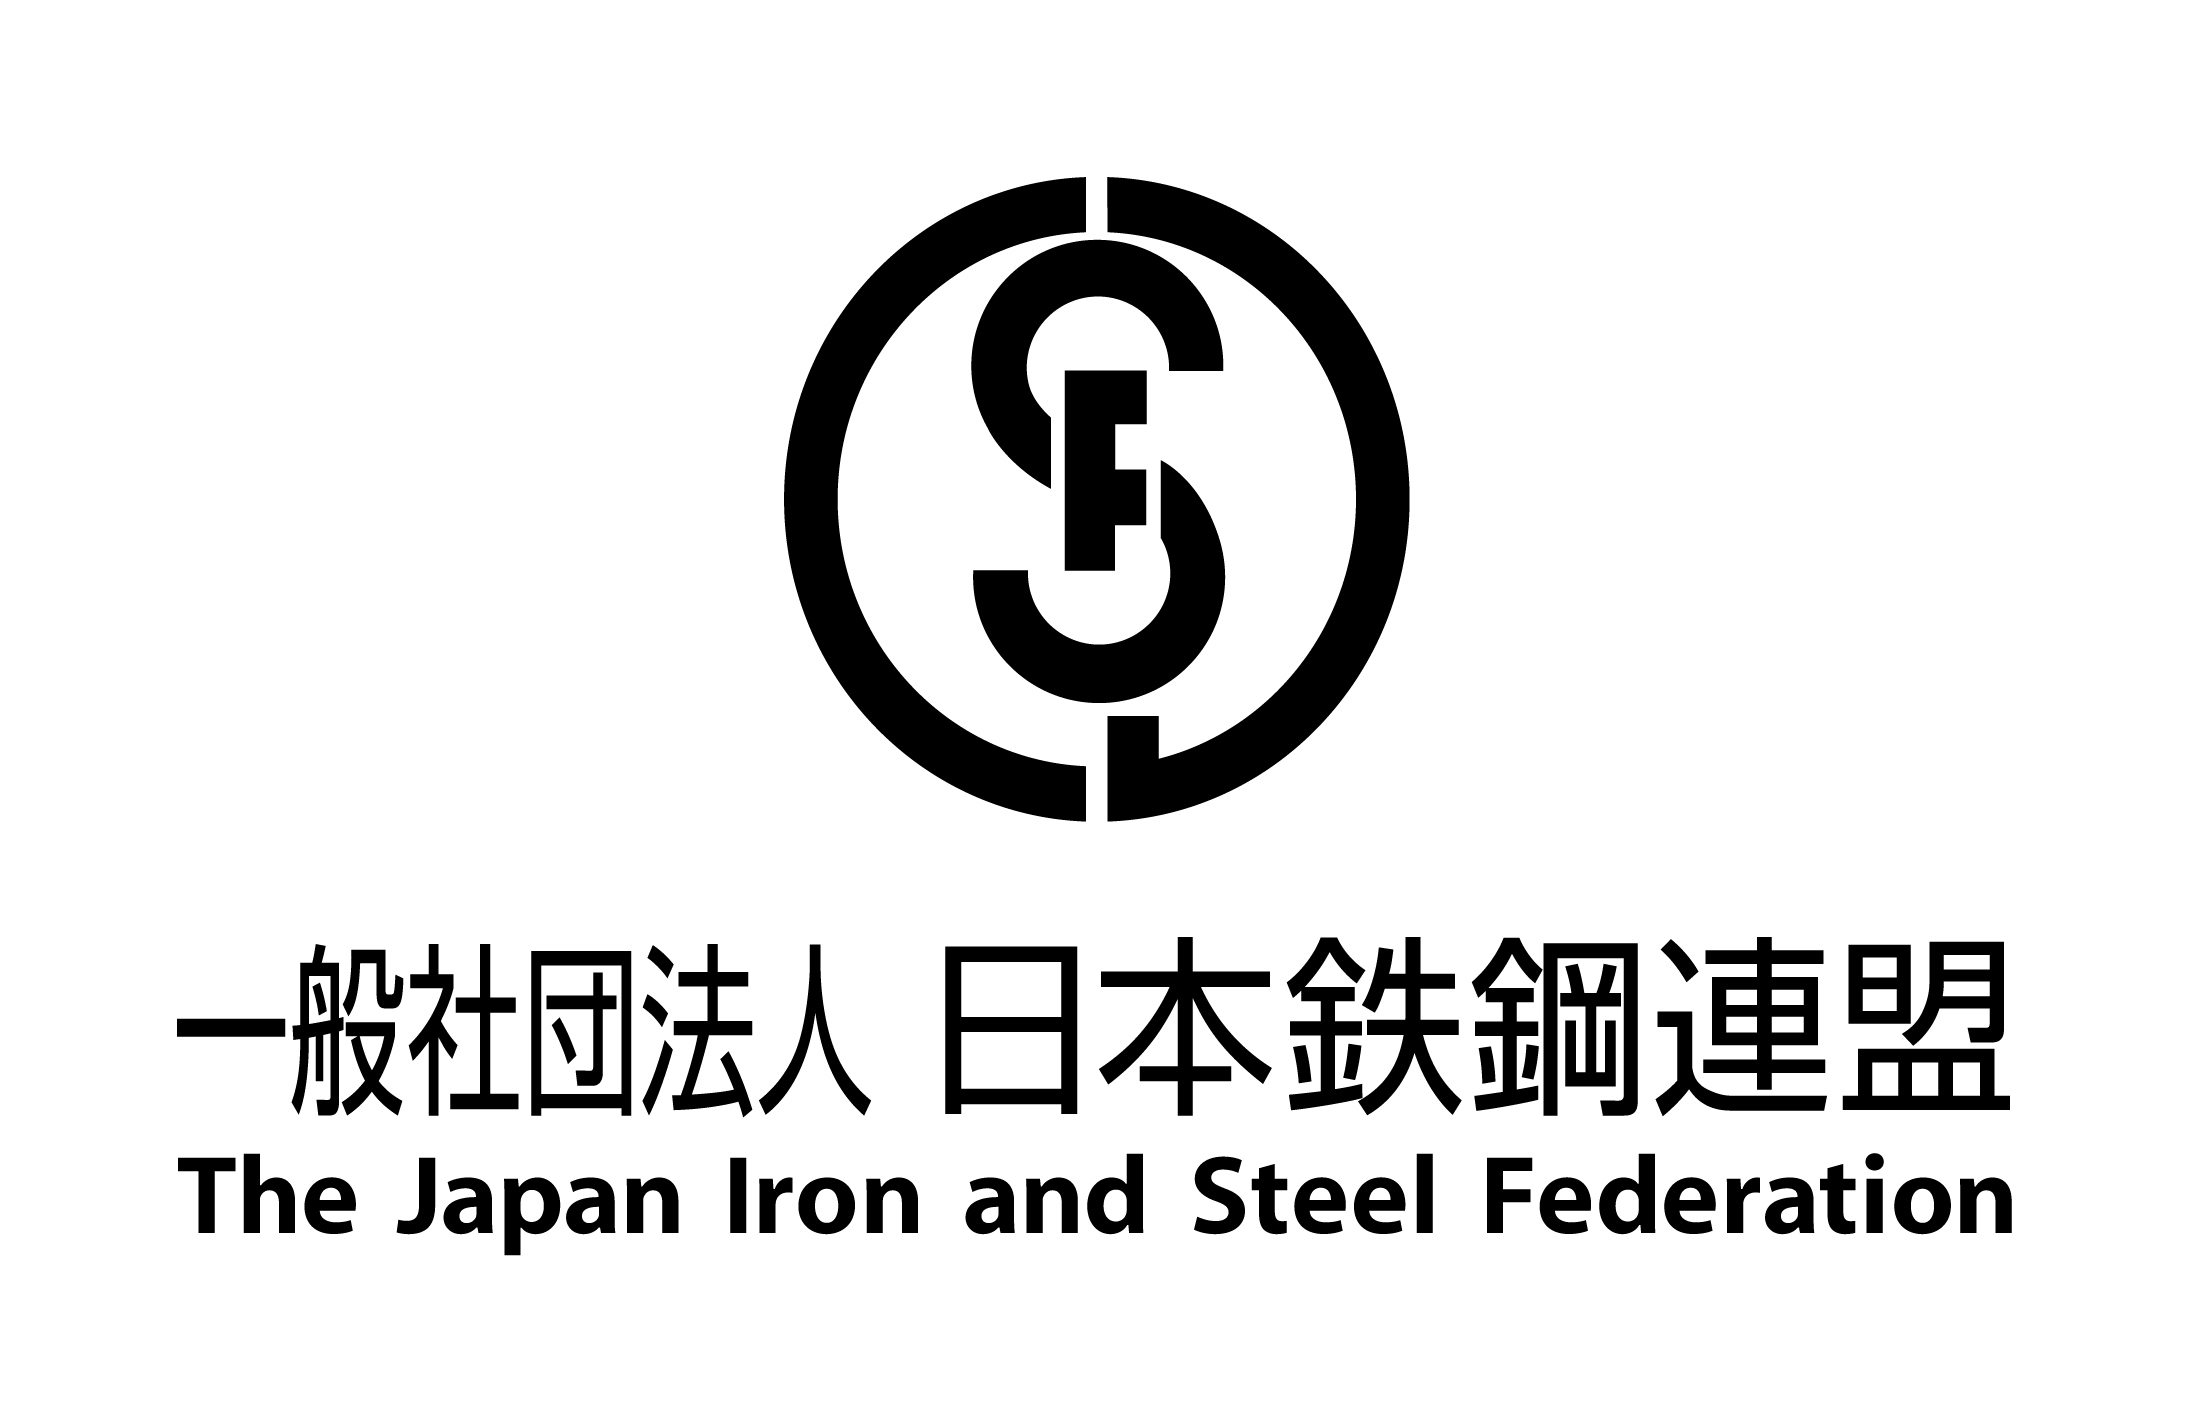 Japan`s exports of steel to the United States are temporary. US consumers do not have the option to import